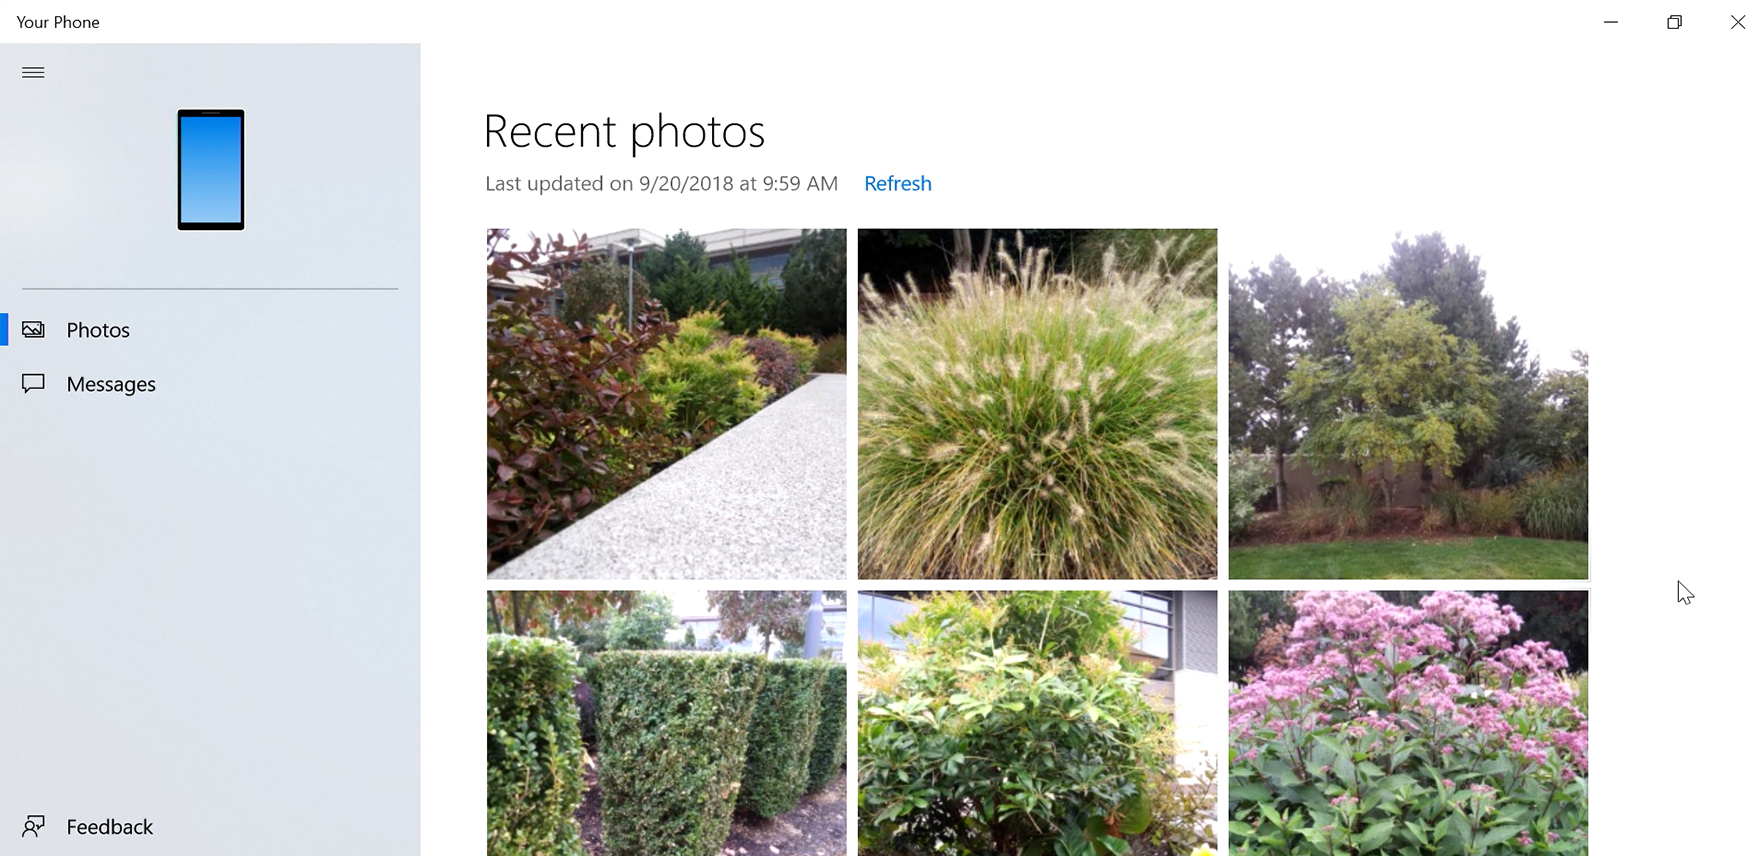 Screenshot of recent photos shown on PC screen using Your Phone app